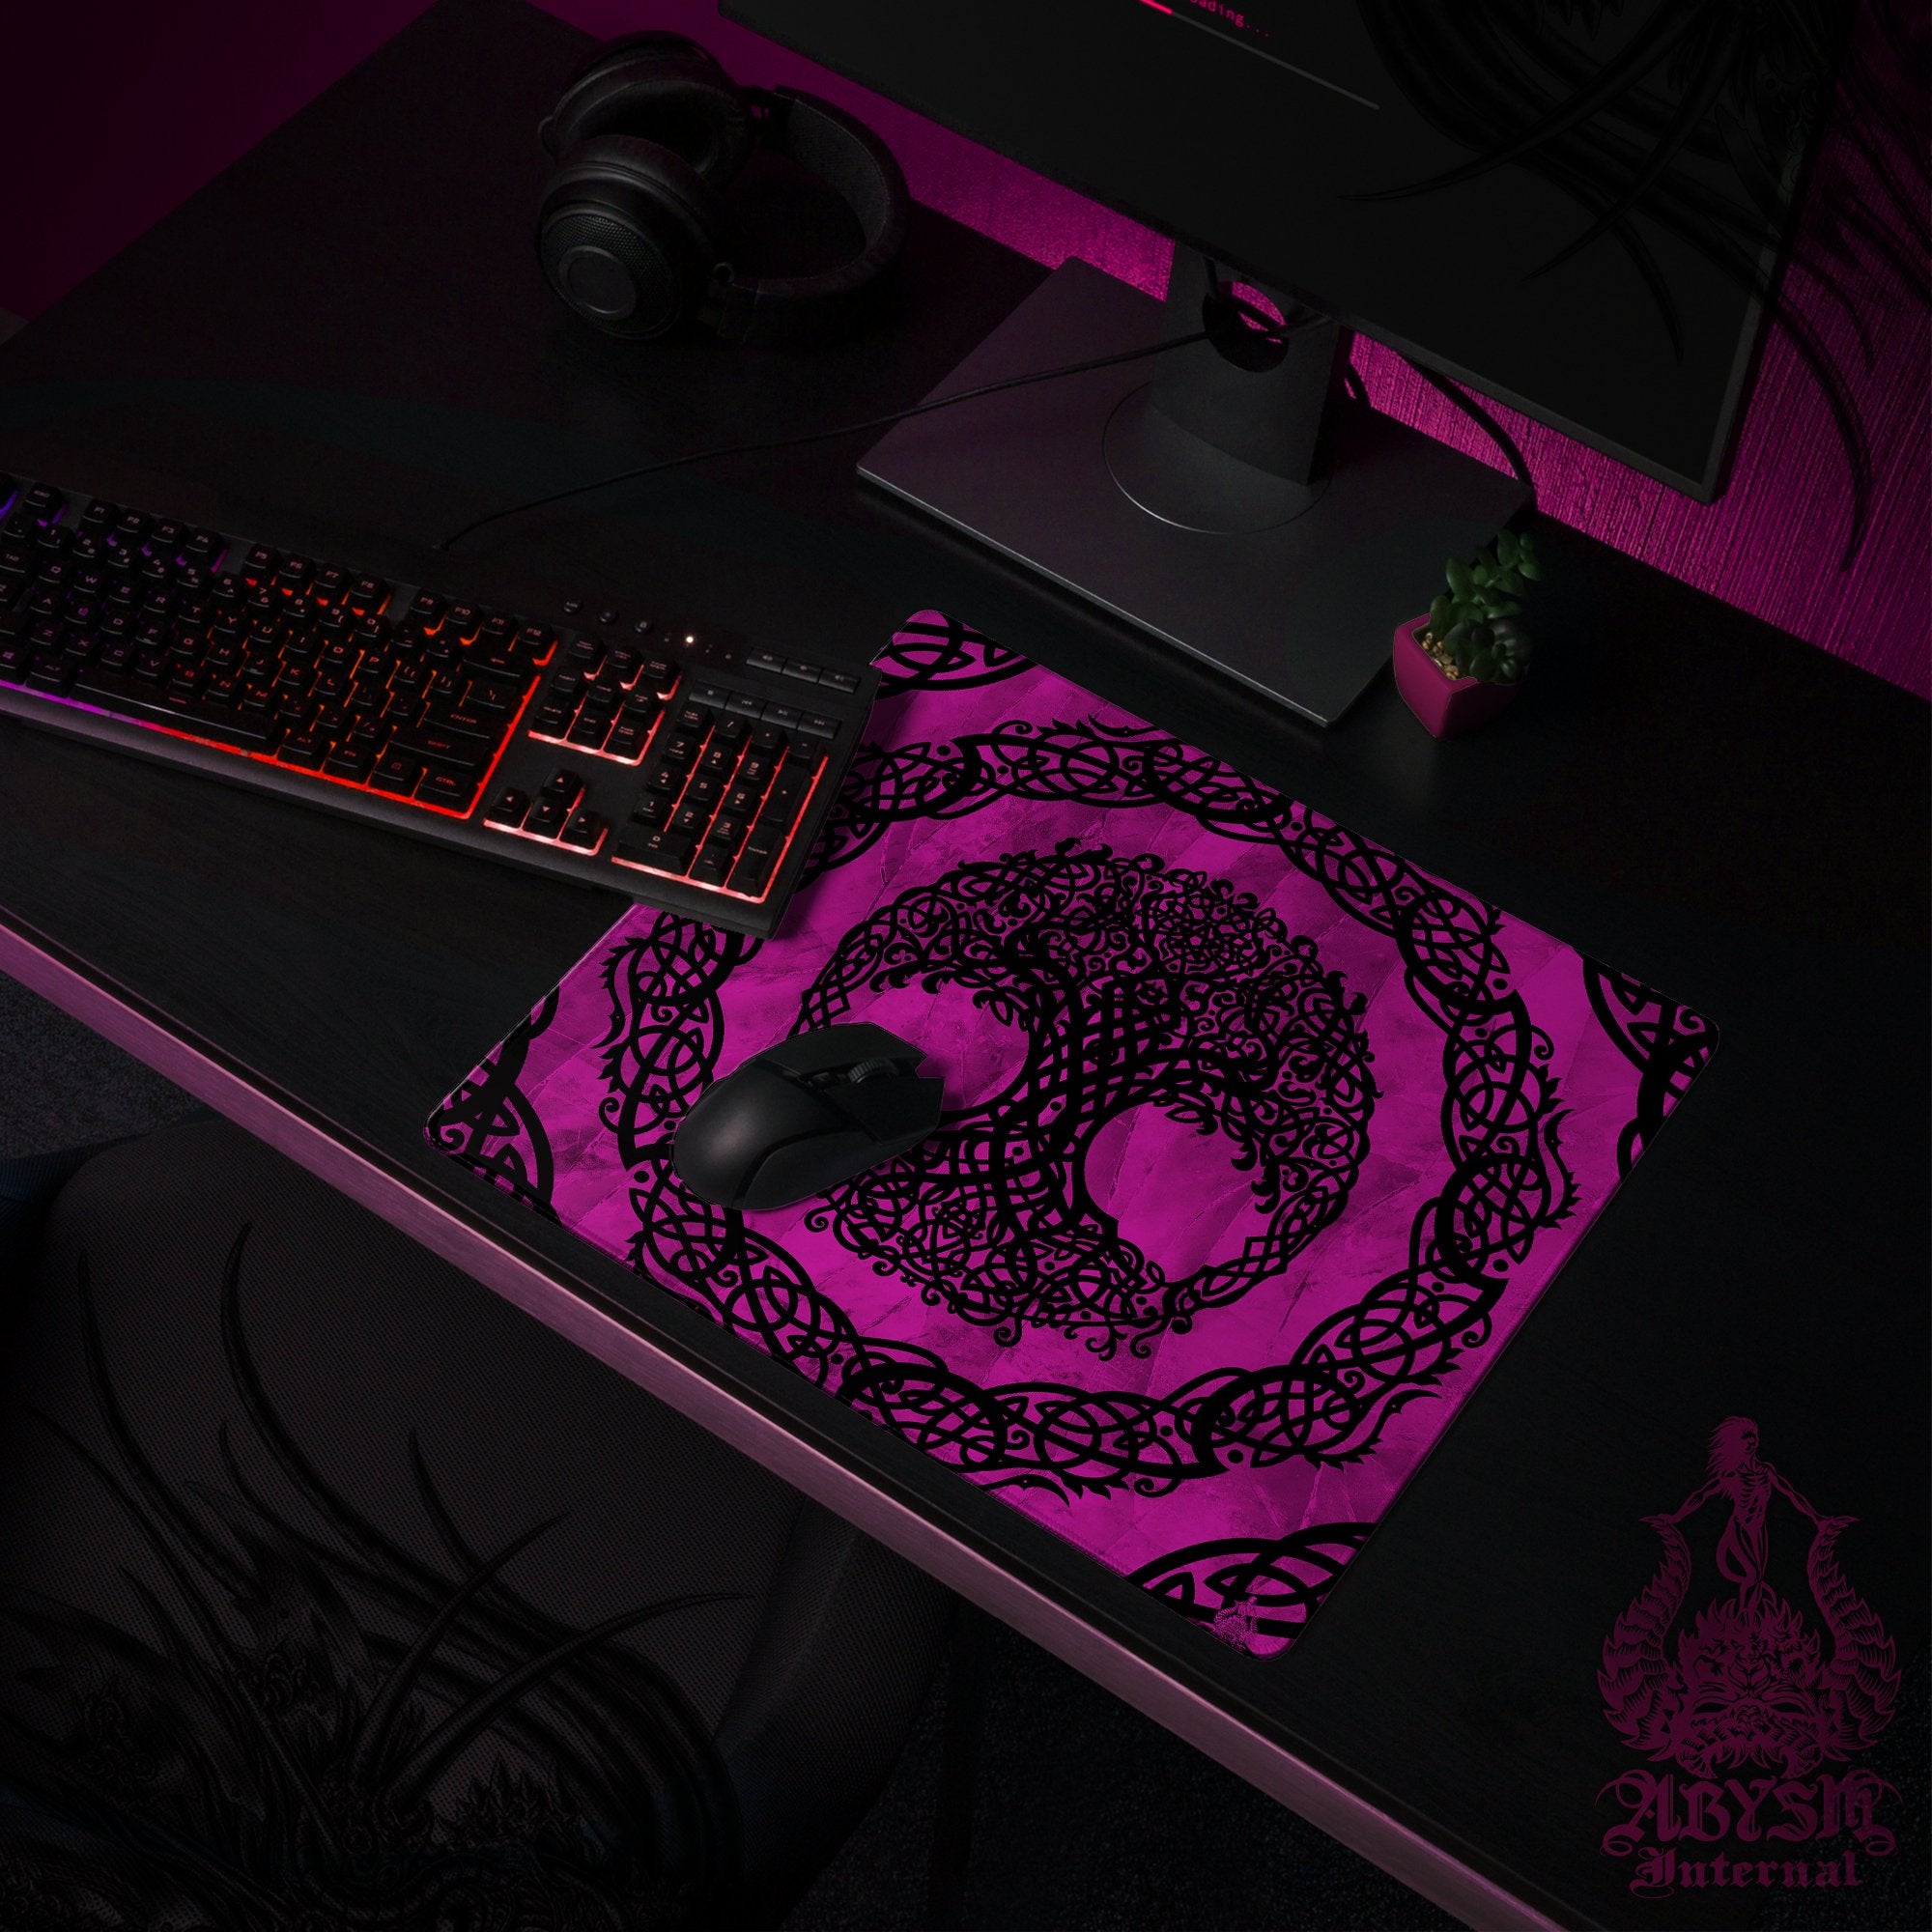 Witchy Gaming Mouse Pad, Tree of Life Desk Mat, Wicca Table Protector Cover, Celtic Knotwork Workpad, Whimsigoth Art Print - Pastel Goth, Pink and Purple Black, 2 Colors - Abysm Internal